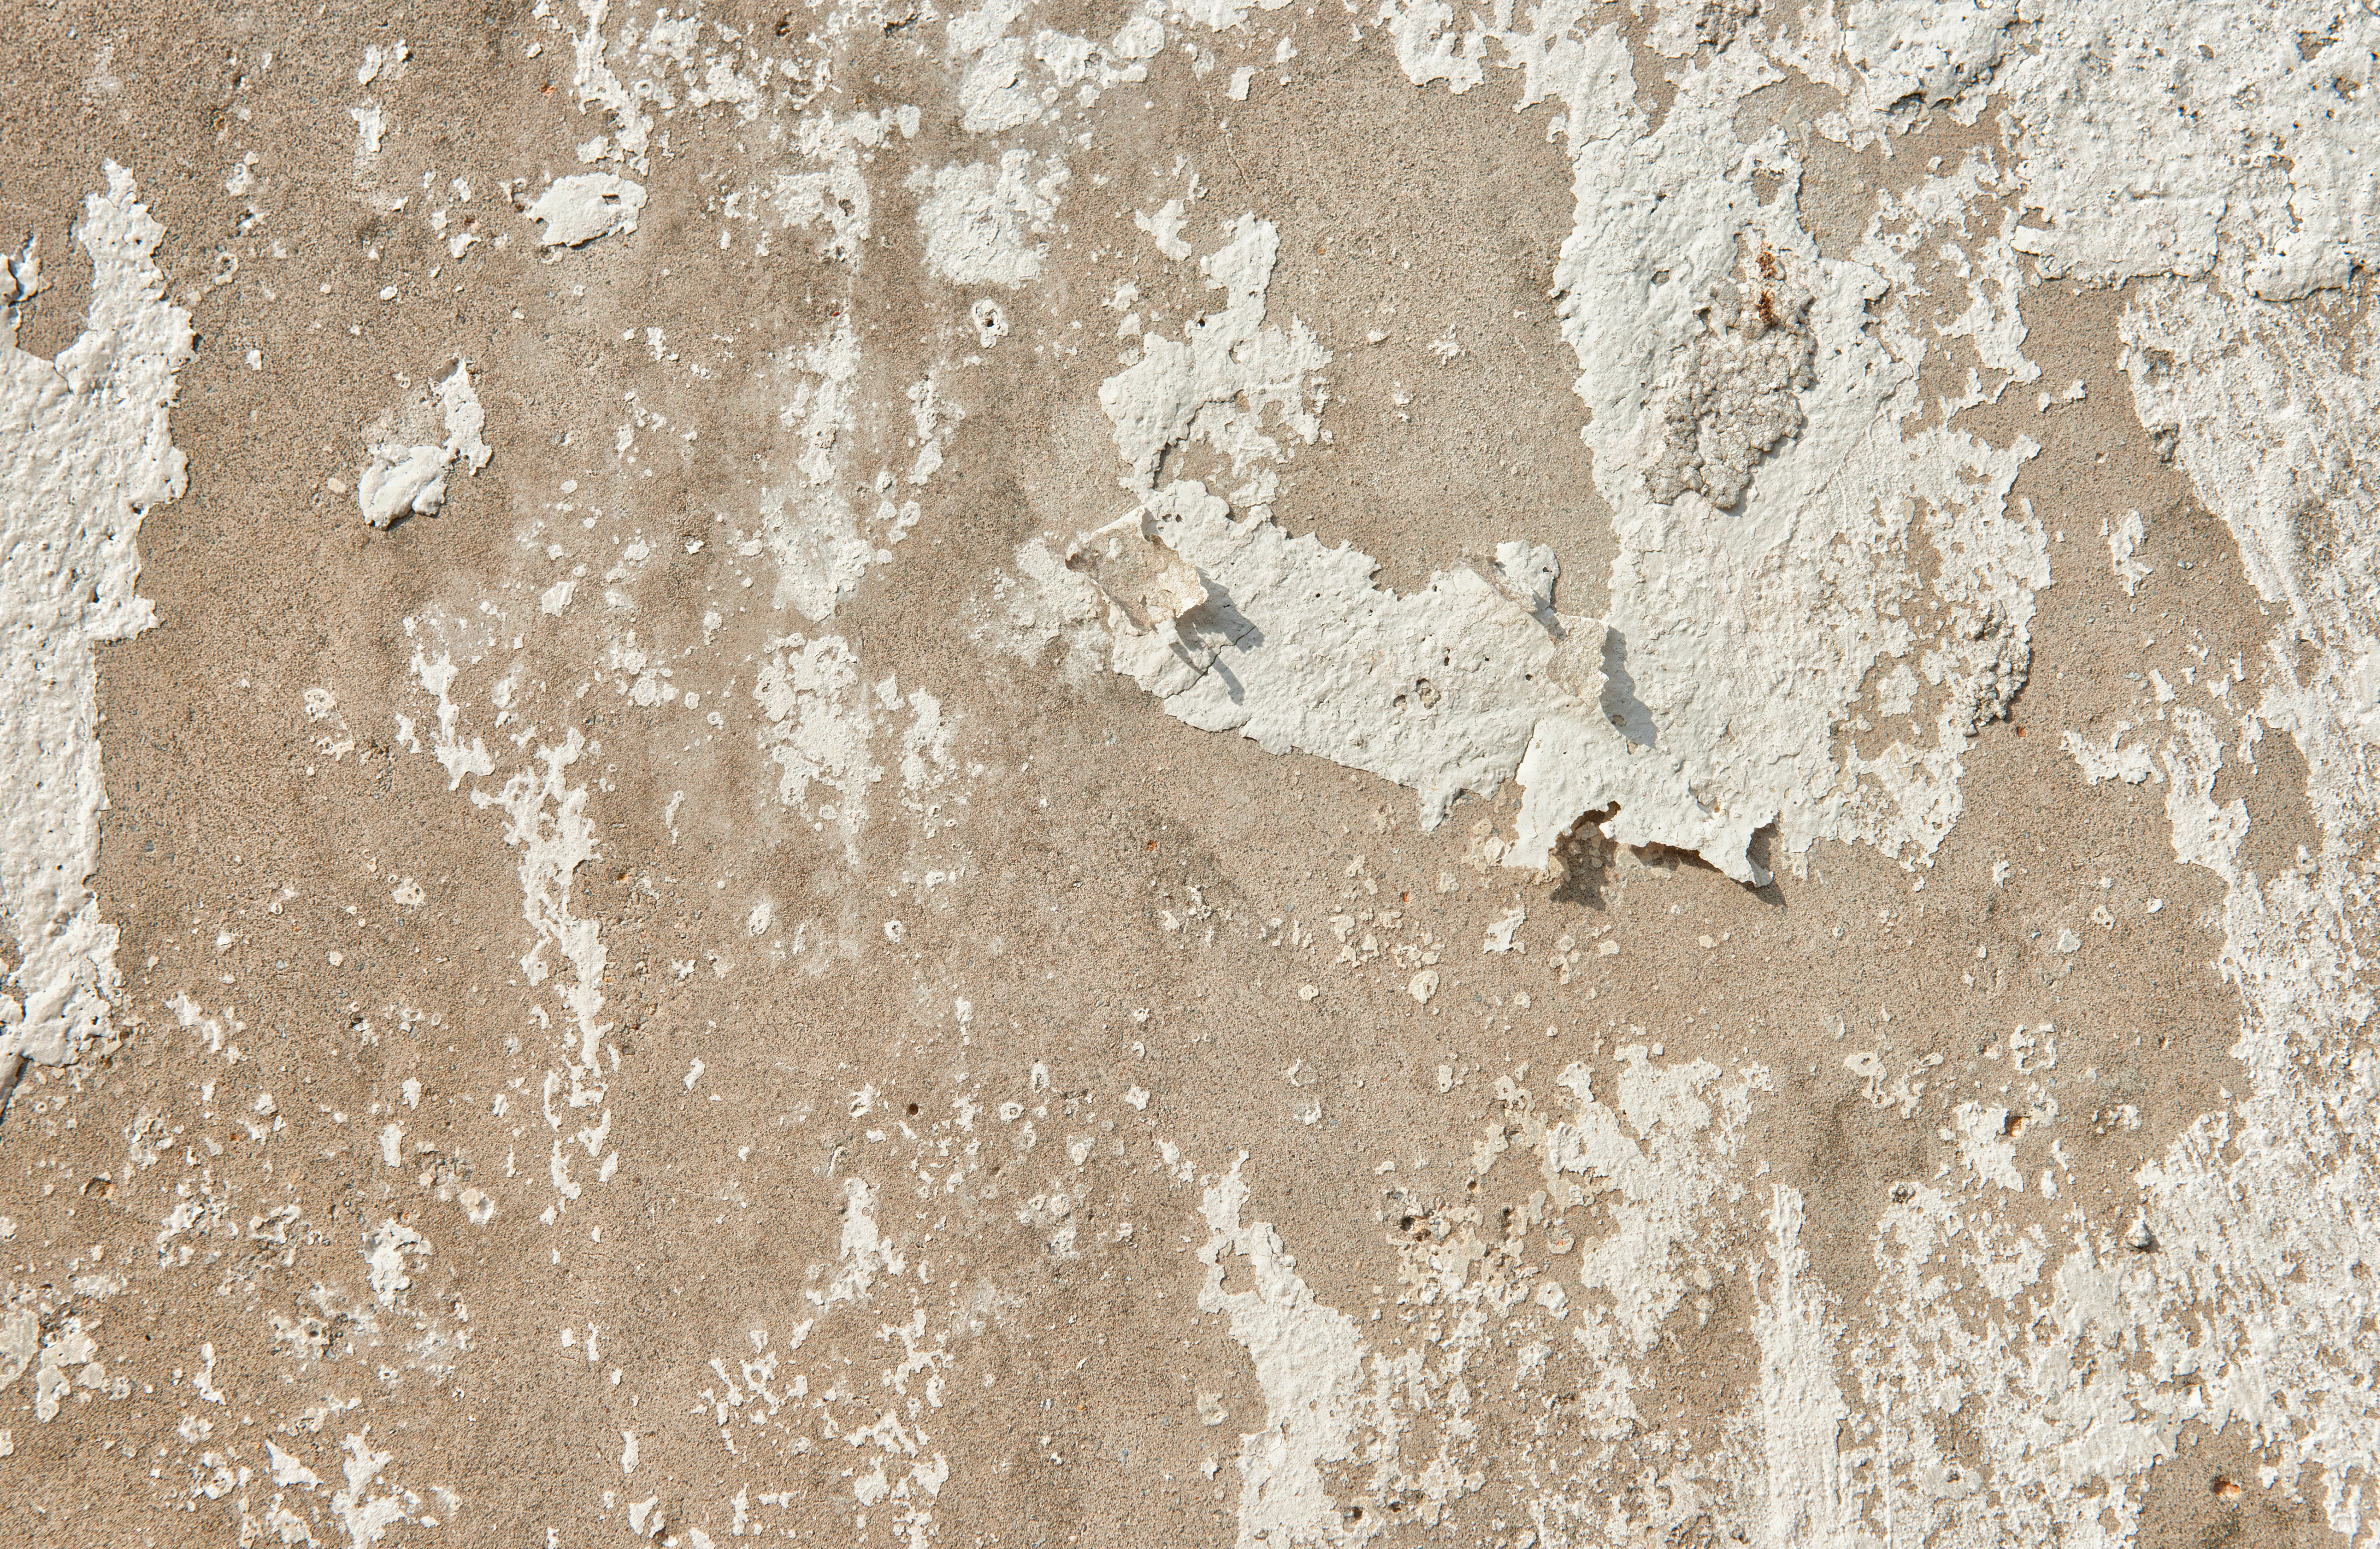 Great grunge texture of old concrete | www.myfreetextures.com | Free